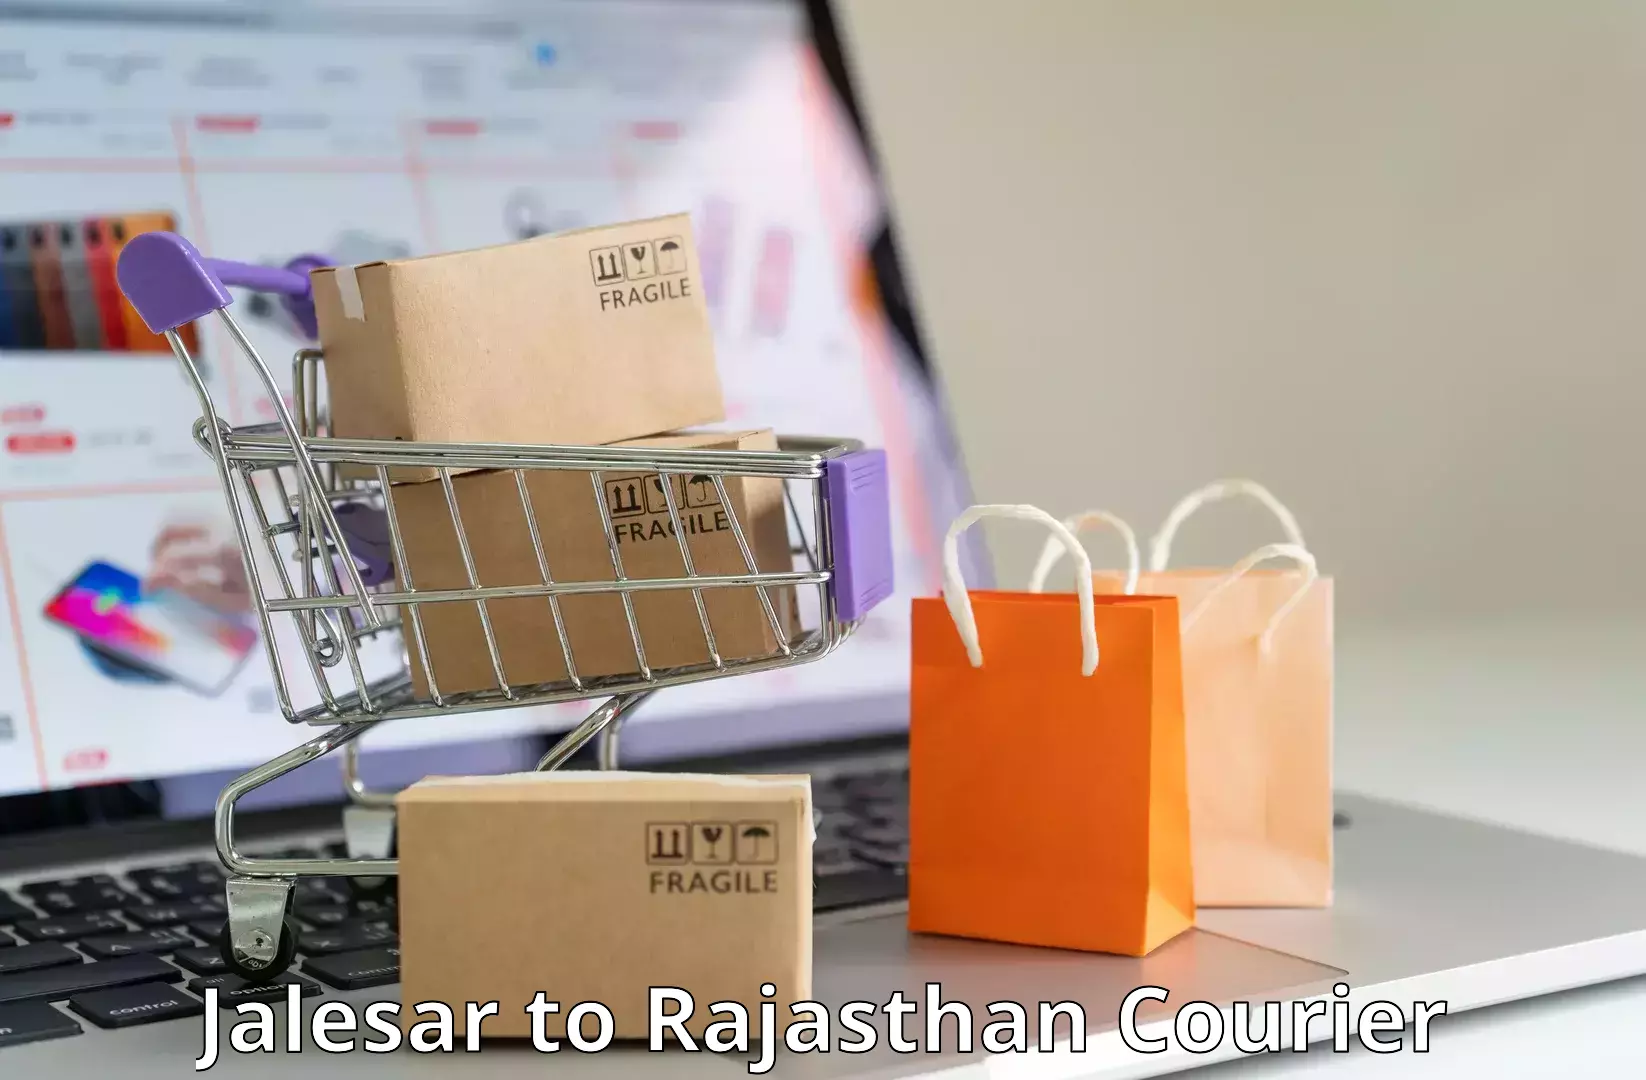 Corporate courier solutions Jalesar to Nagaur